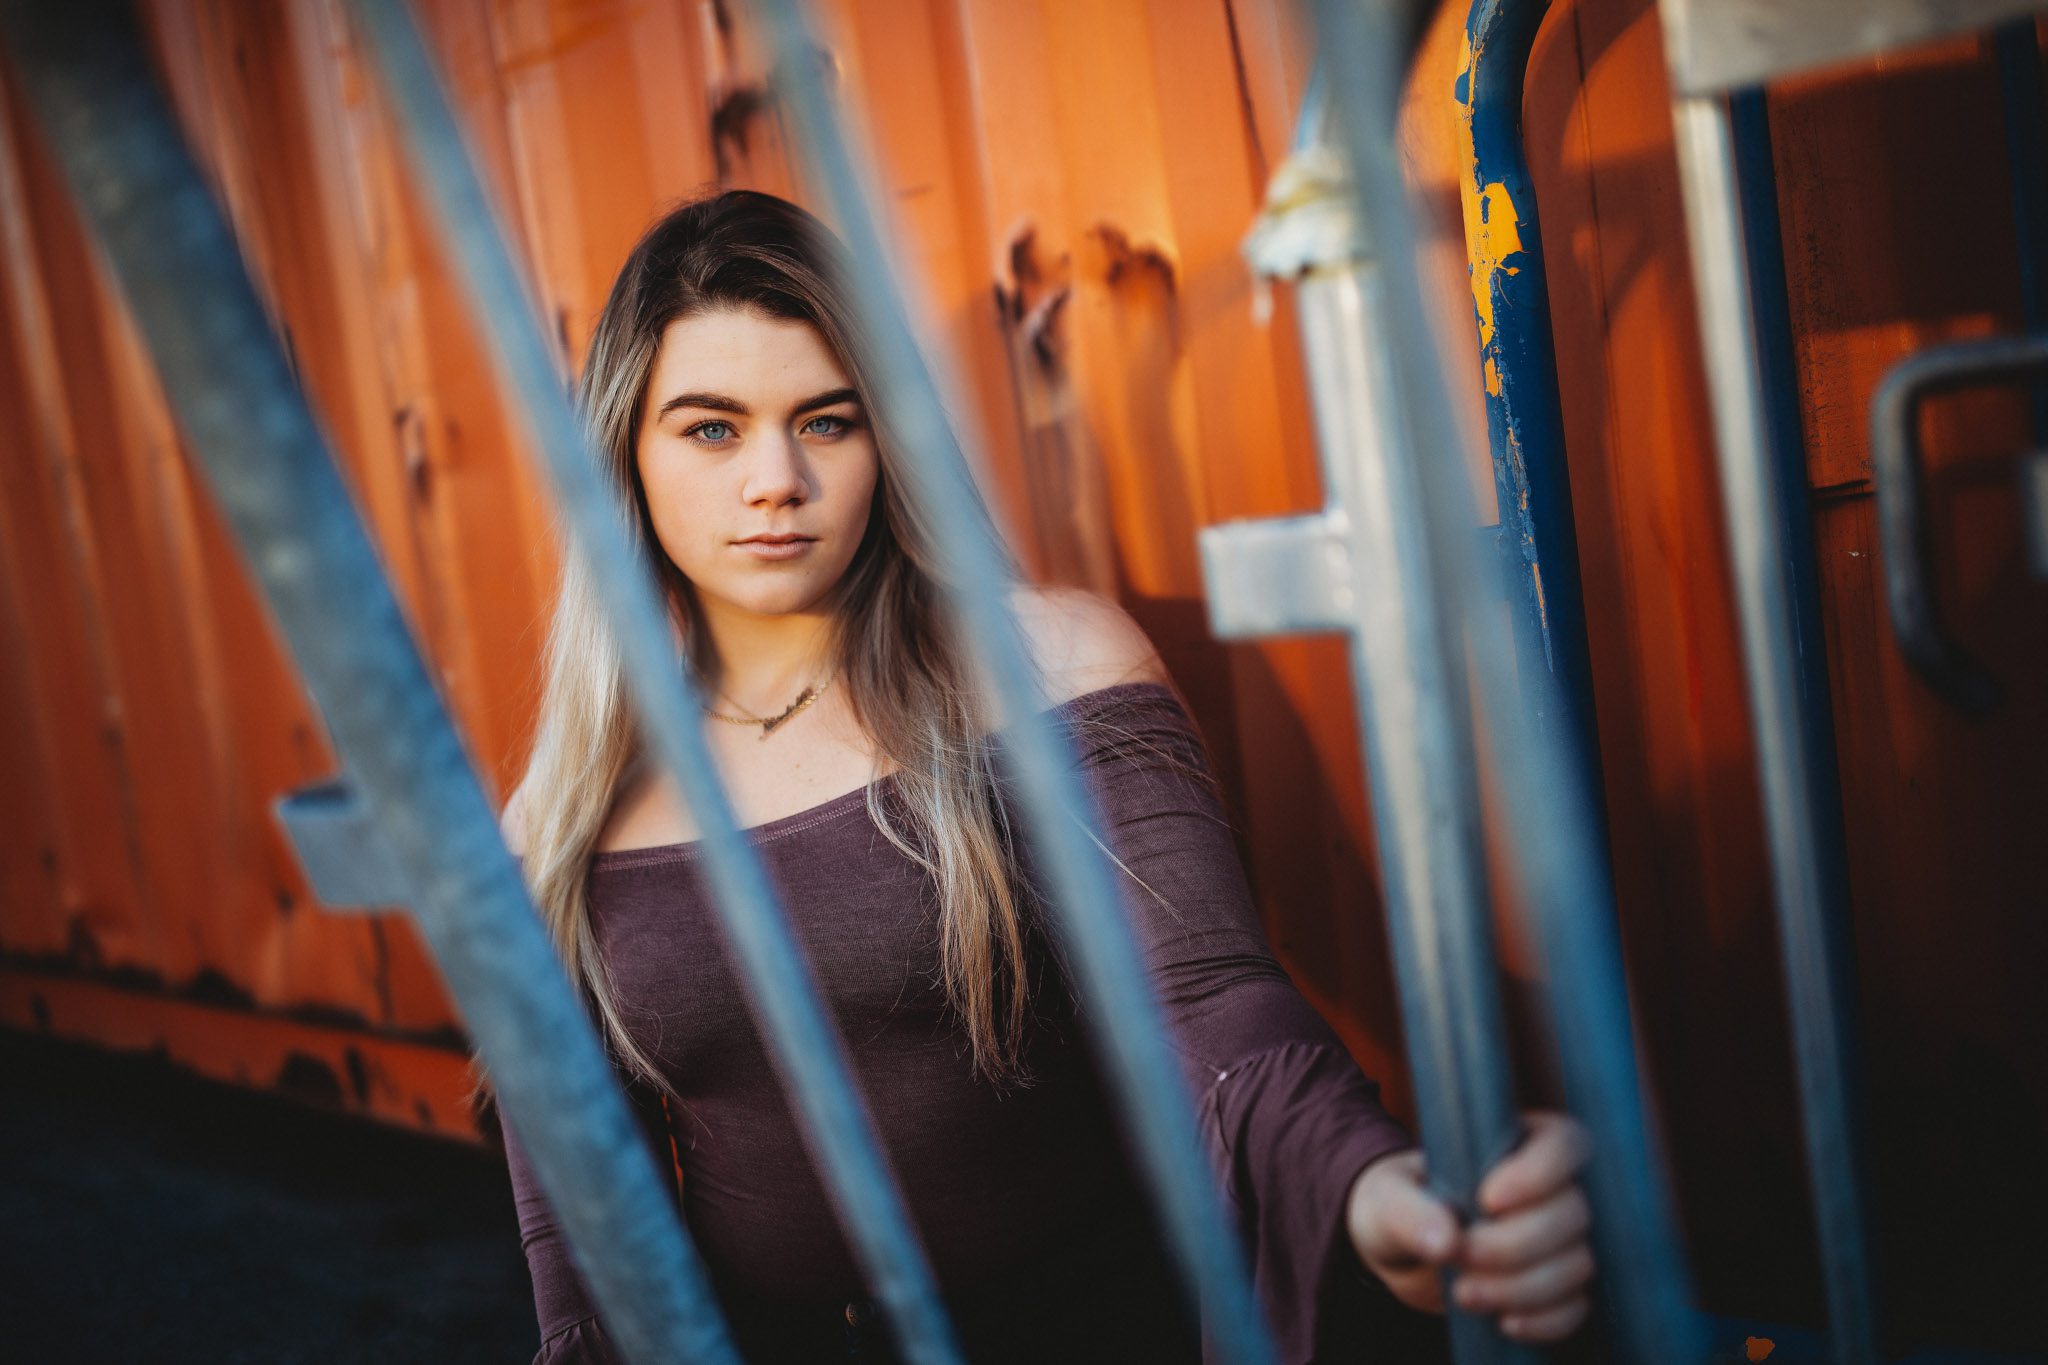 Edgy urban senior portrait of a young woman with a shipping container in Massachusetts photographed by Sean Wytrwal of J&S Photography